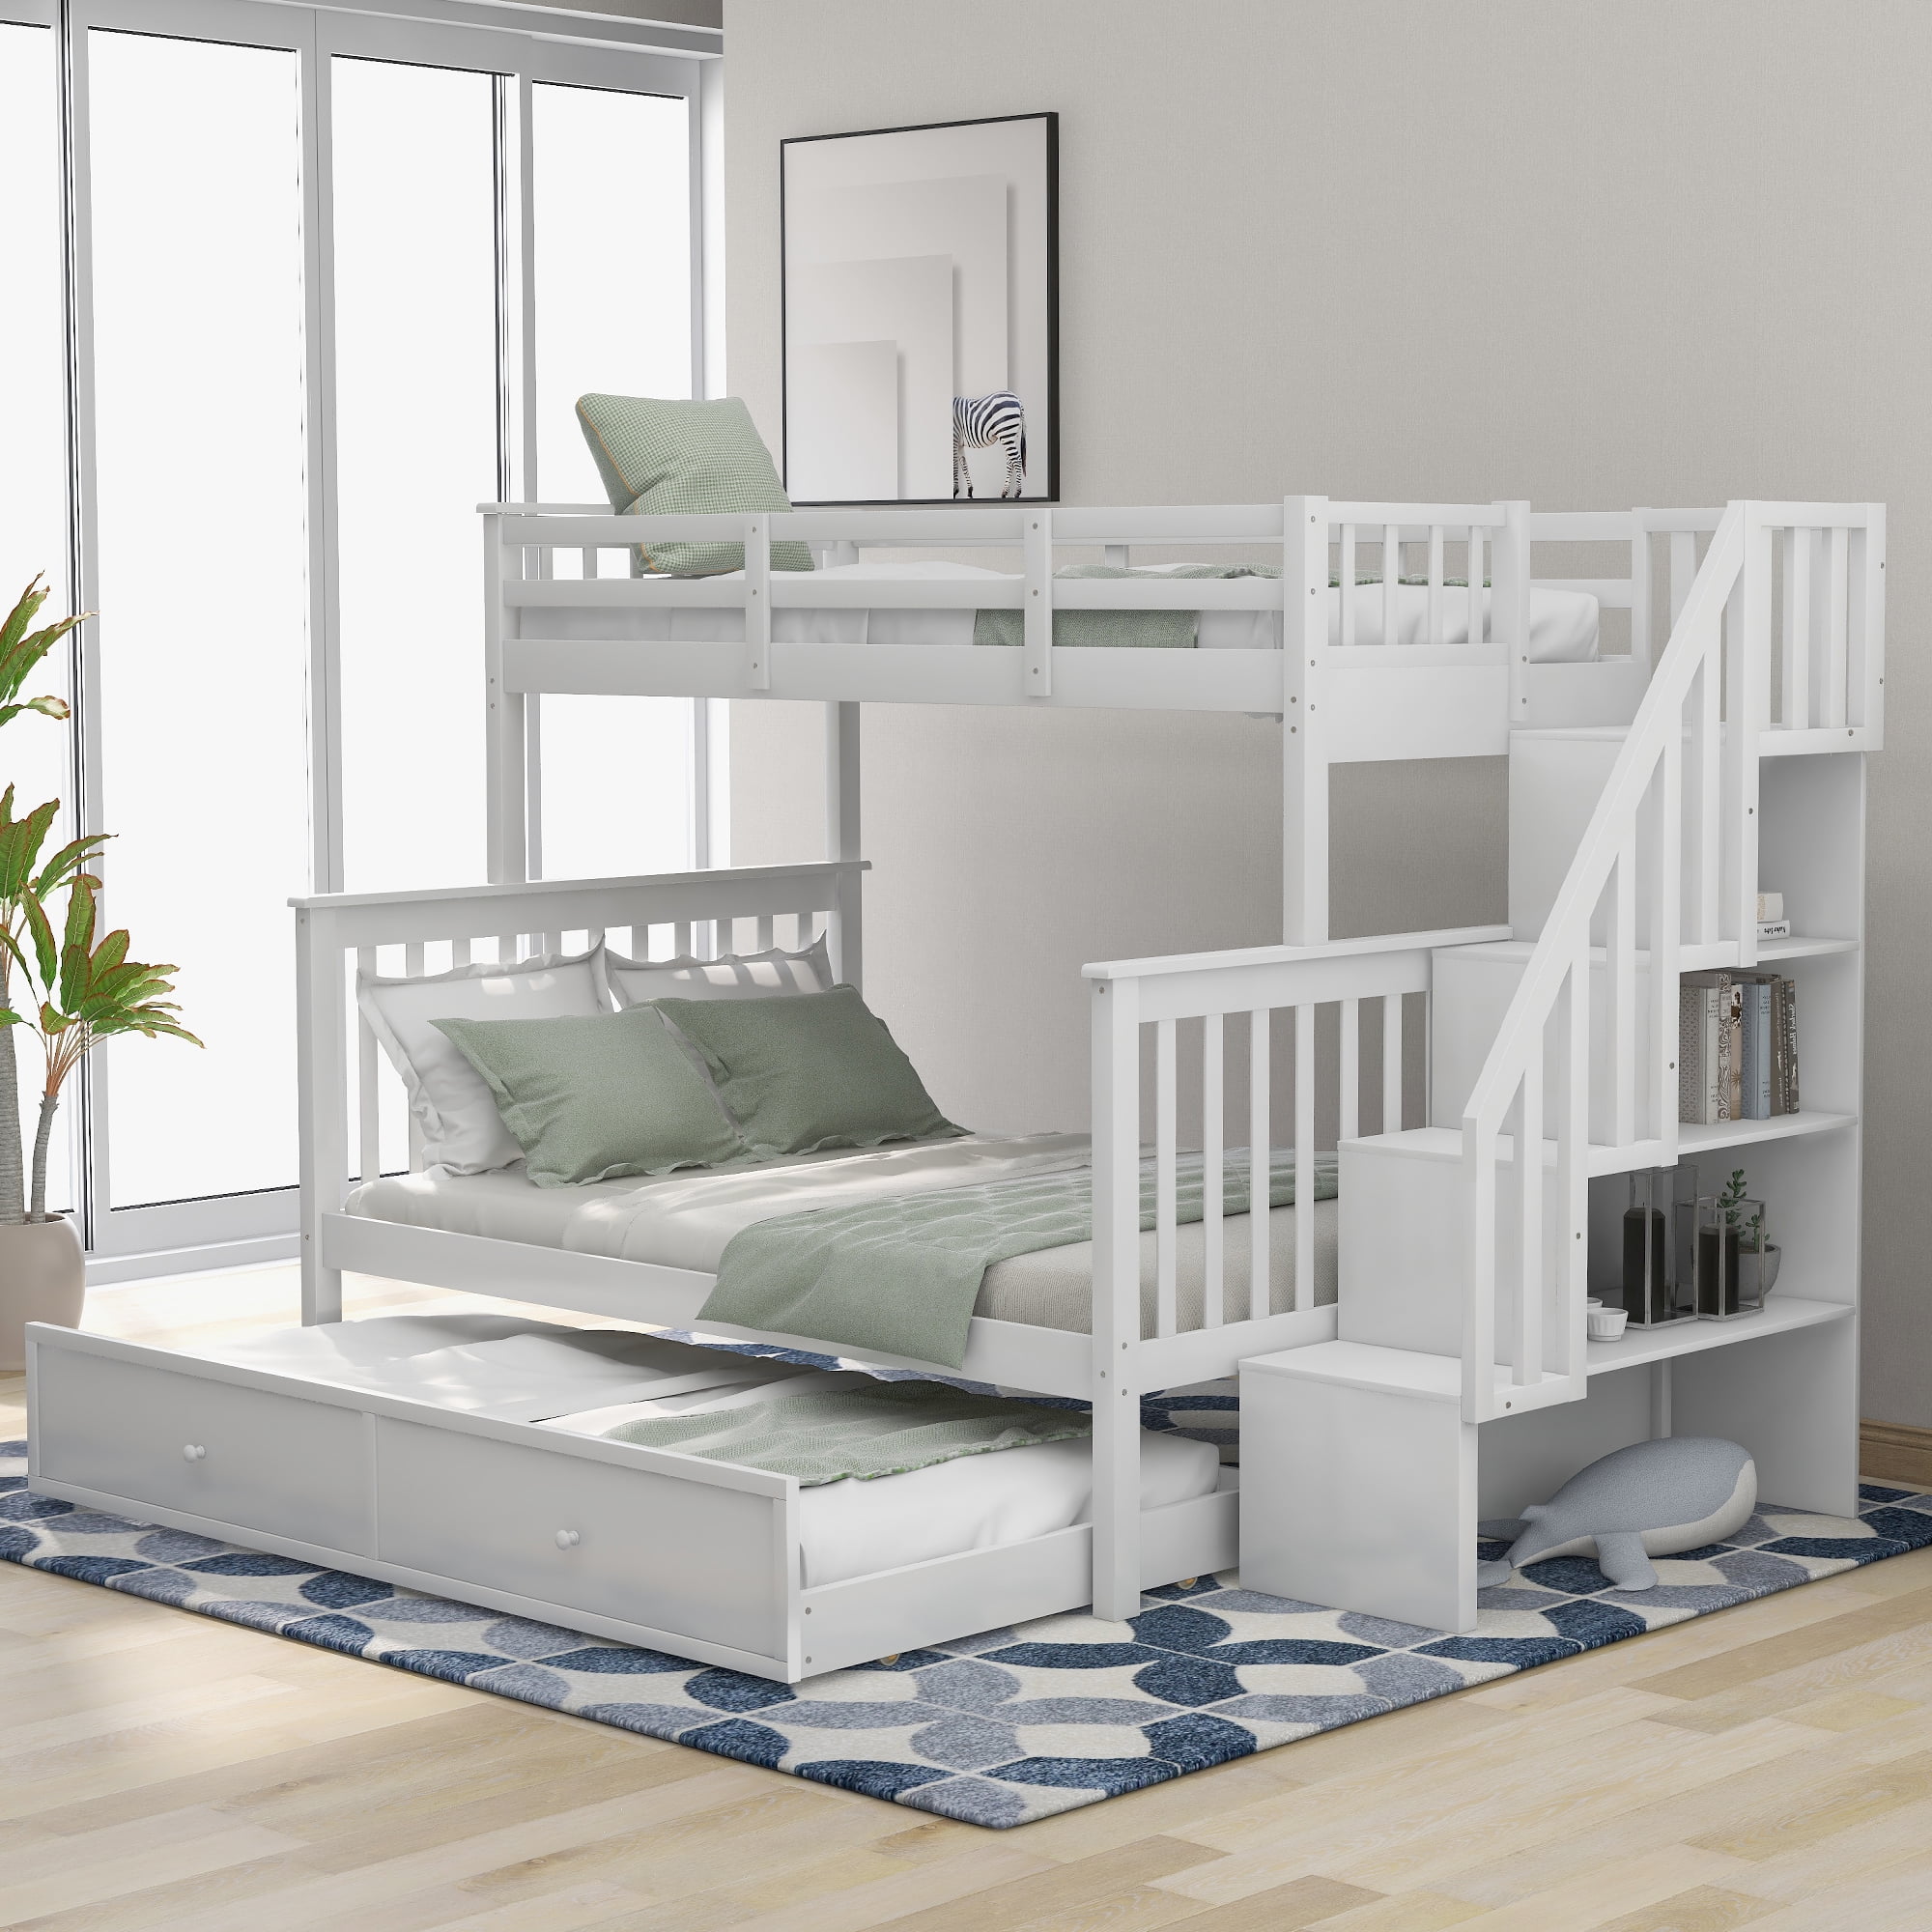 Stairway Bunk Trundle Bed And Storage, Twin Over Full Bunk Bed With Storage White